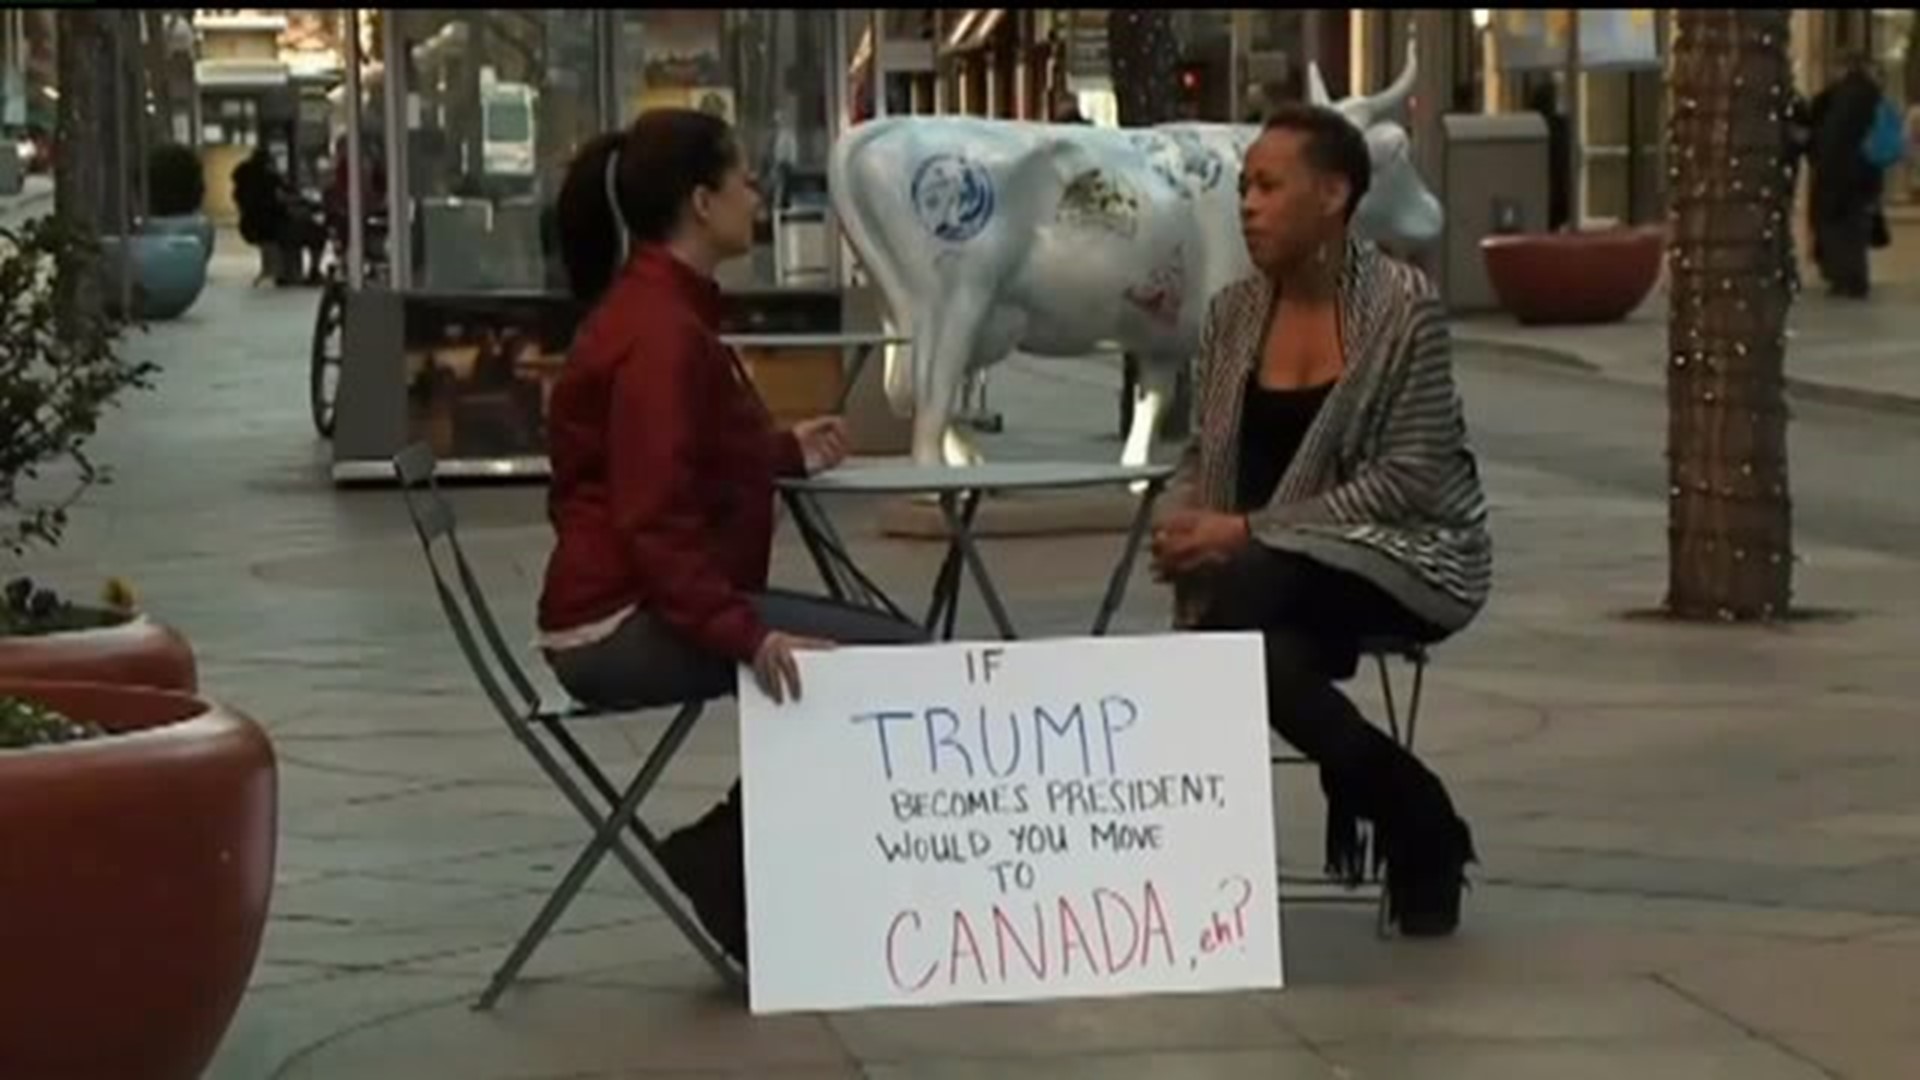 More people would move to Canada if Trump wins